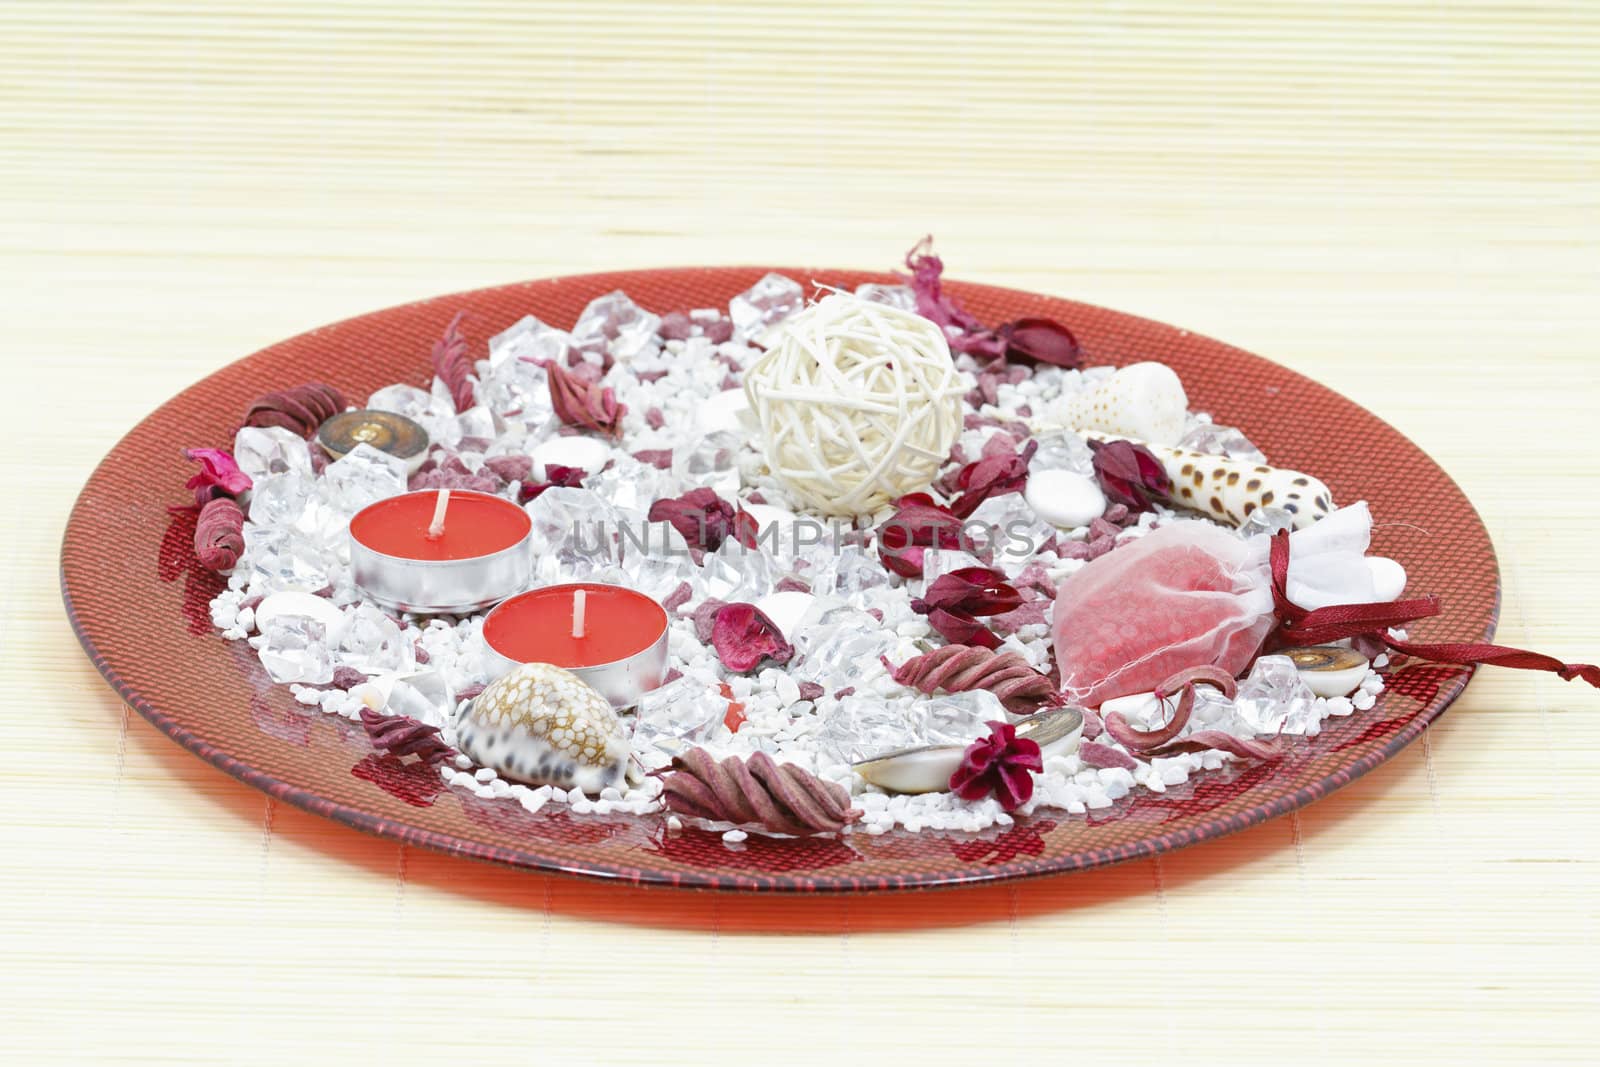 Table decoration with various shells and candles in decorative plate